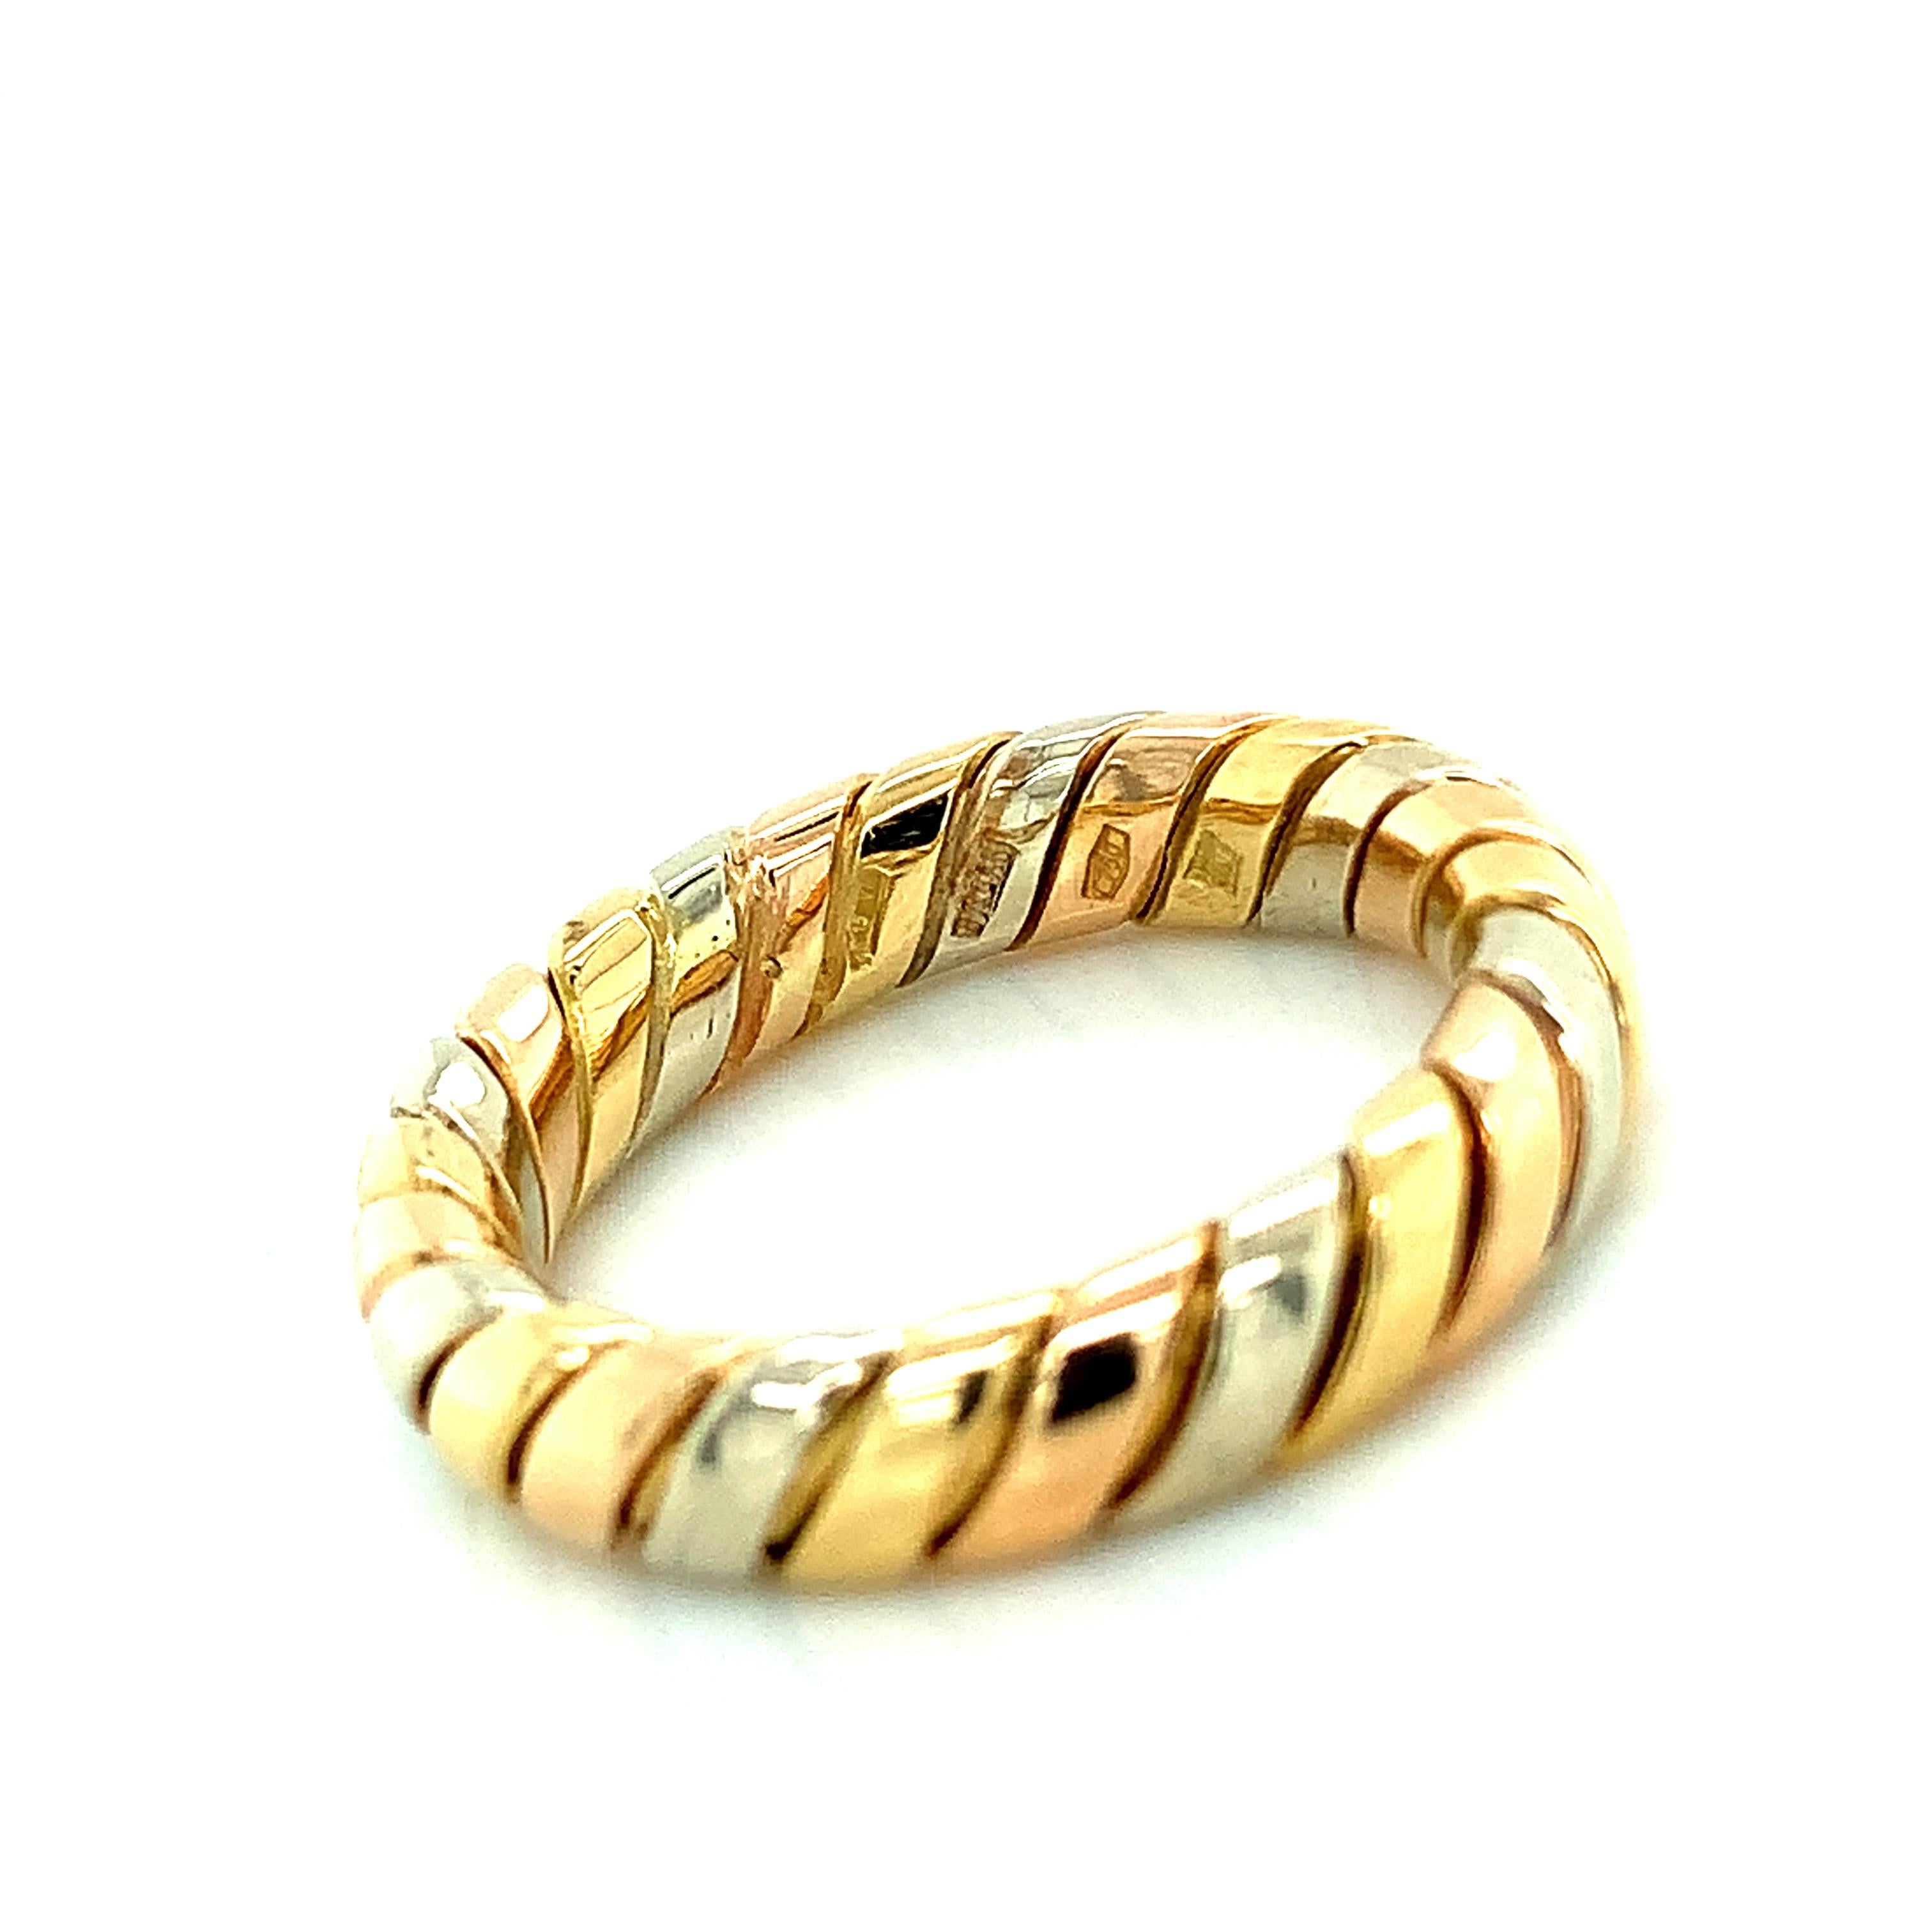 Bvlgari 18 karat yellow, white, and rose gold ring from the iconic Tubogas collection. Marked: Bvlgari / Made in Italy. It weighs 5.8 grams. Size 6.